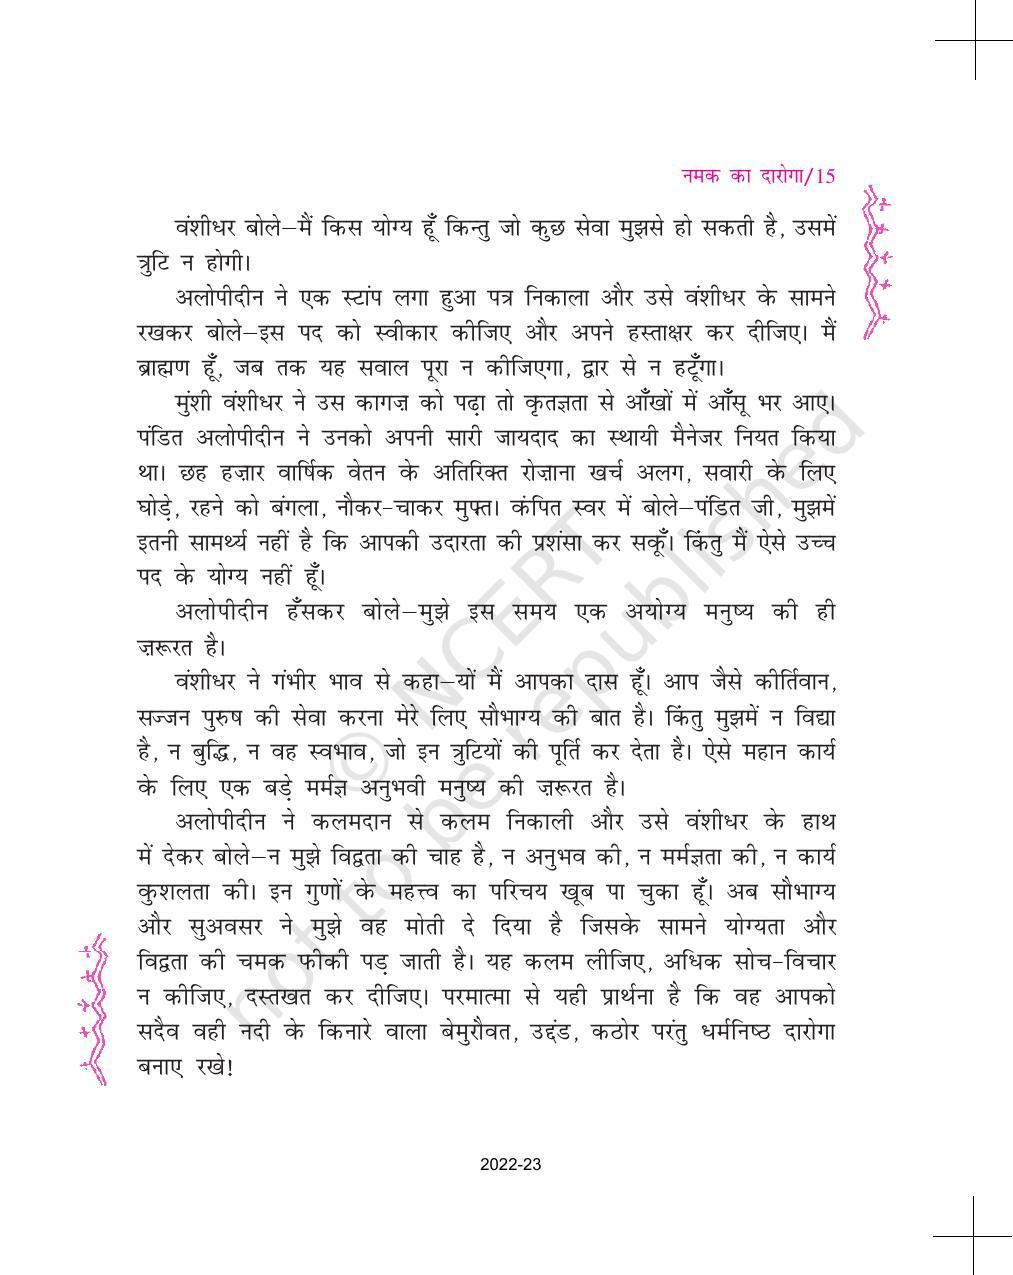 NCERT Book for Class 11 Hindi Aroh Chapter 1 नमक का दारोगा - Page 15